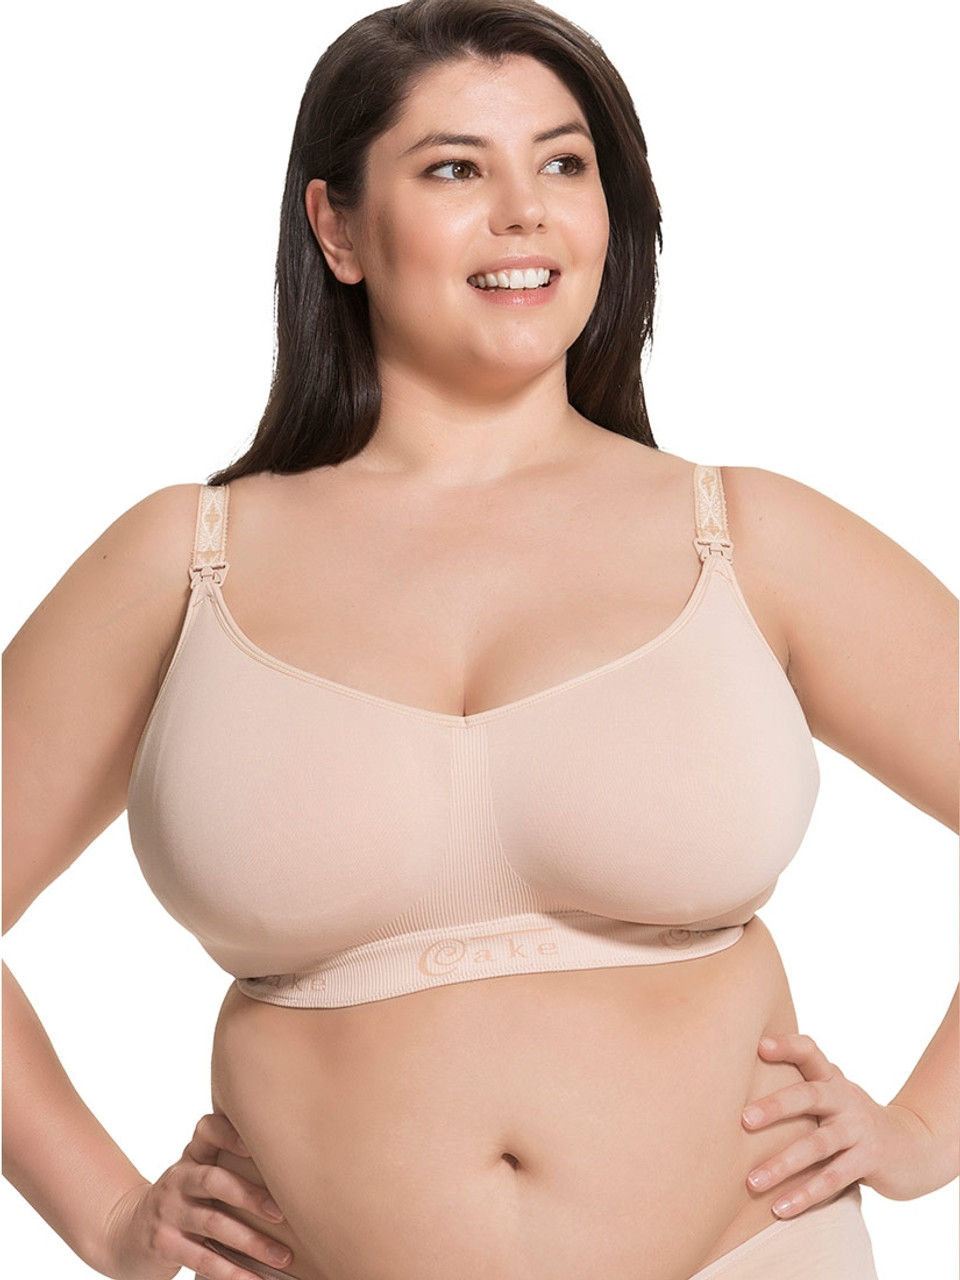 how to calculate bra size how big is breast size 36 at Rs 499/piece, Herbal Products in Haridwar